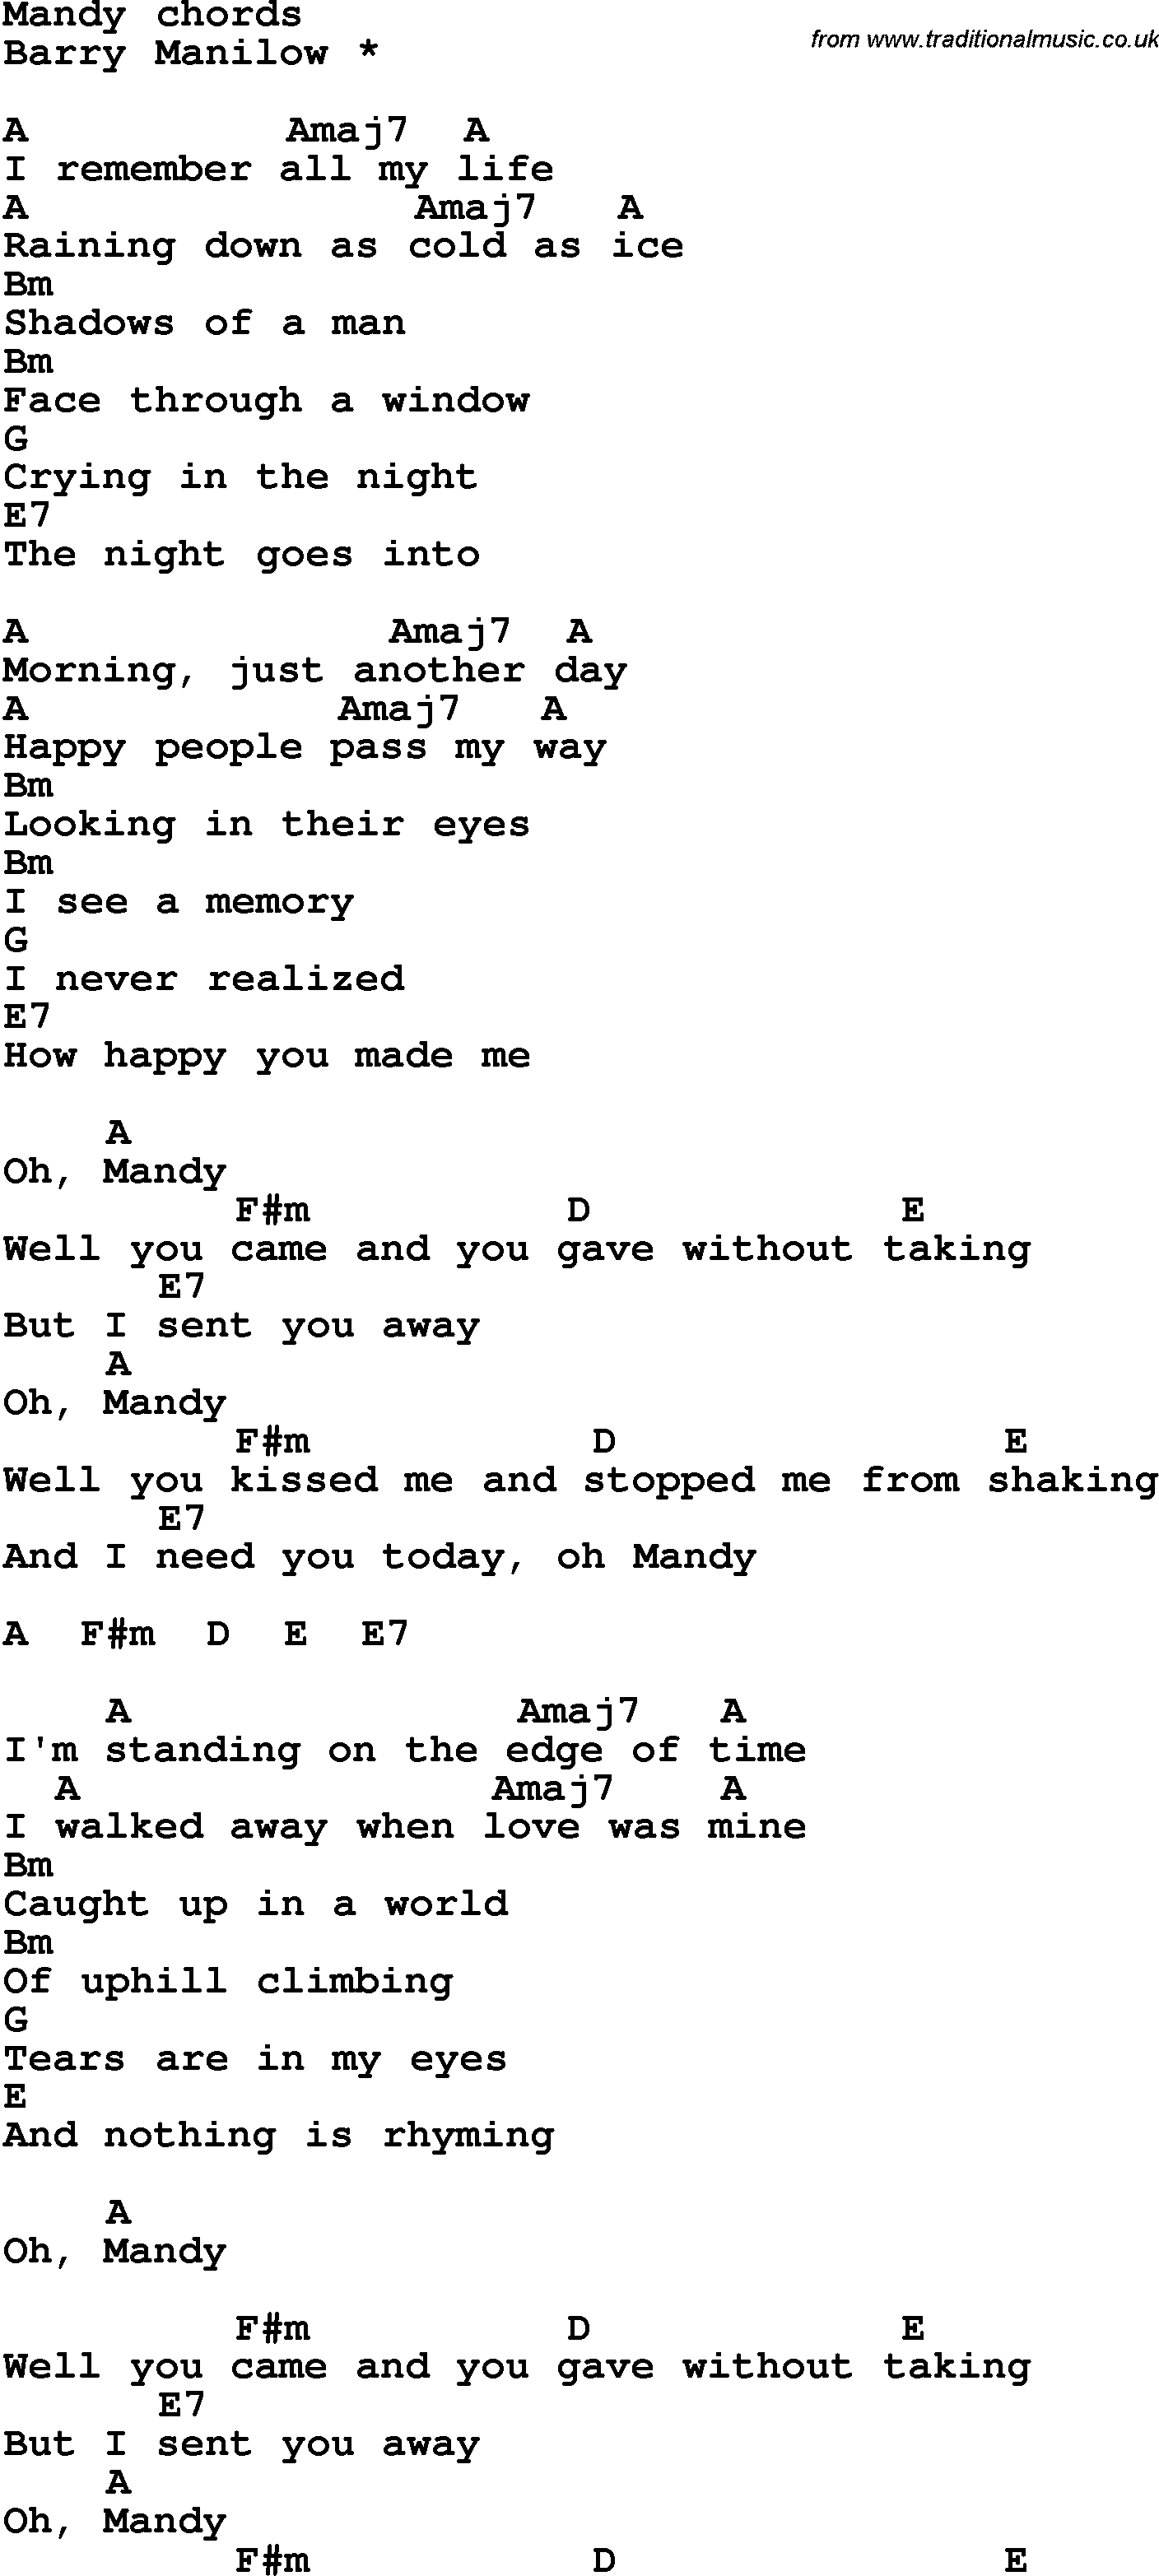 Song Lyrics with guitar chords for Mandy